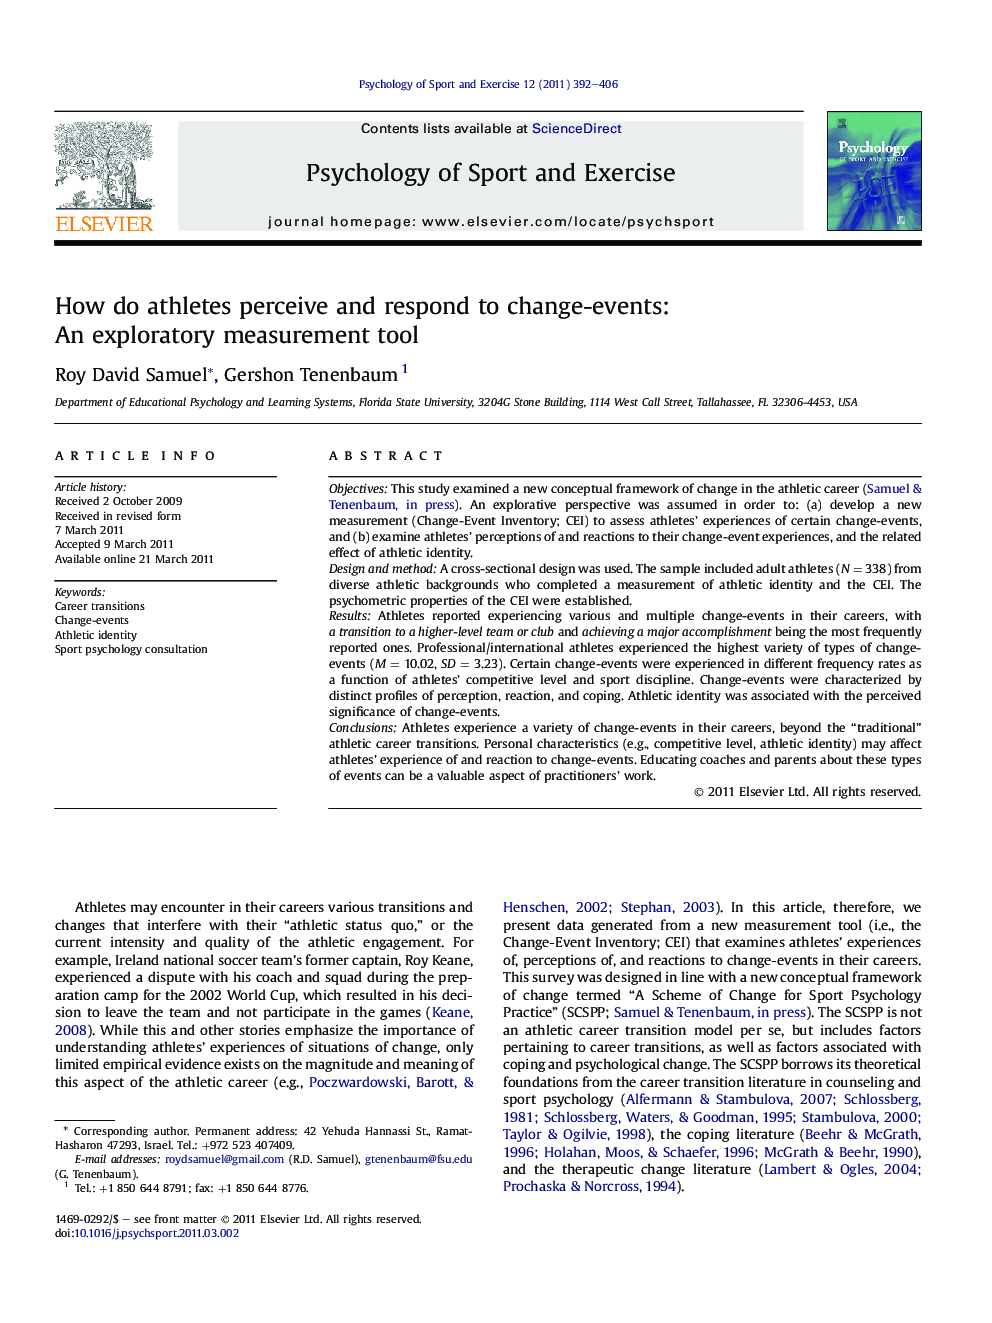 How do athletes perceive and respond to change-events: An exploratory measurement tool